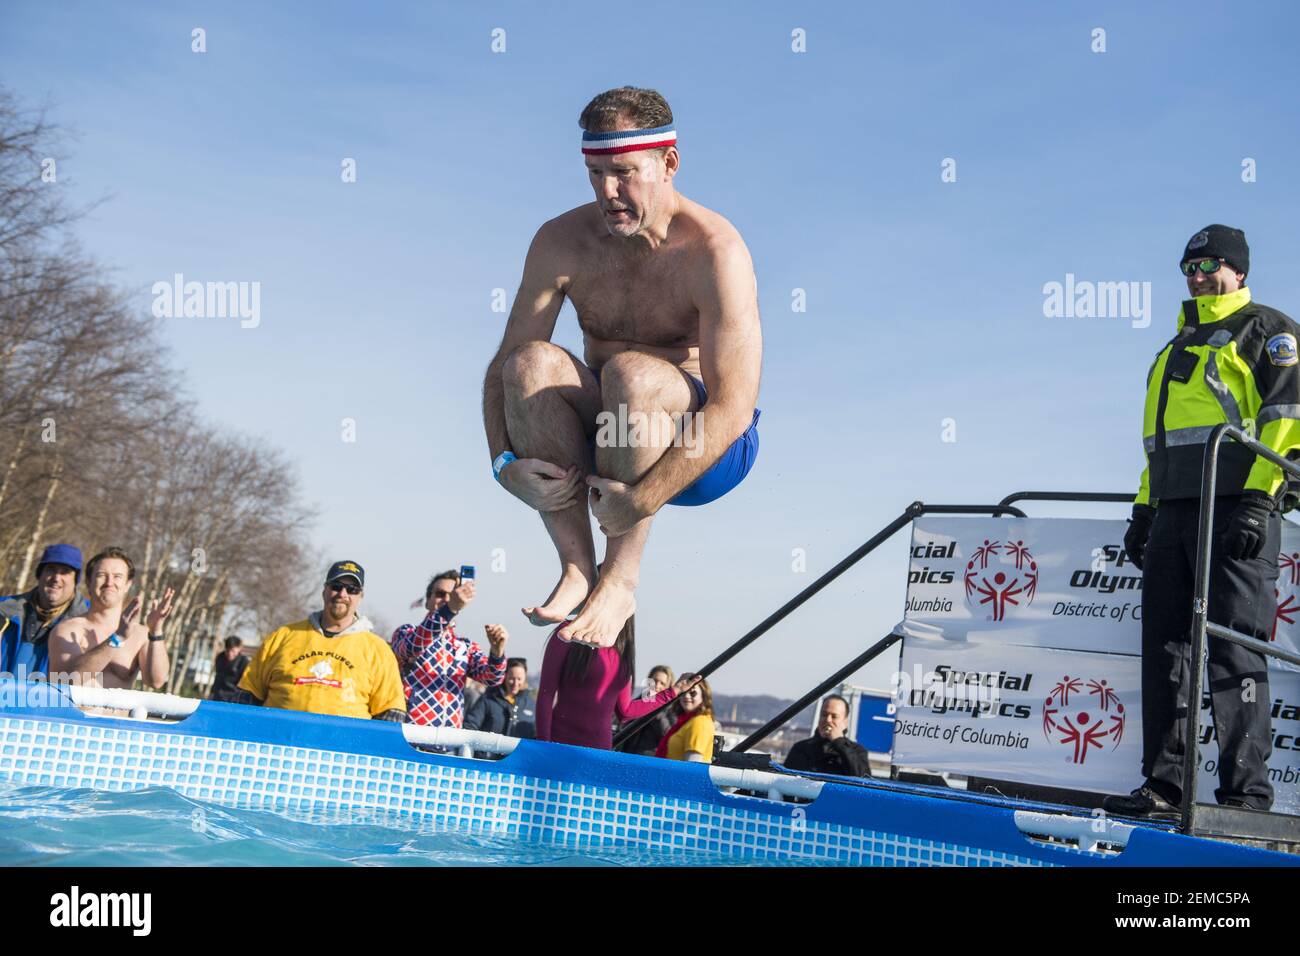 UNITED STATES - FEBRUARY 02: Political strategist Doug Heye participates in the Polar Plunge fundraiser to benefit the Special Olympics DC, at the Yards Park on Saturday, February 2, 2019. Heye's team, Cobra Kai, raised over $8000. (Photo By Tom Williams/CQ Roll Call) Stock Photo